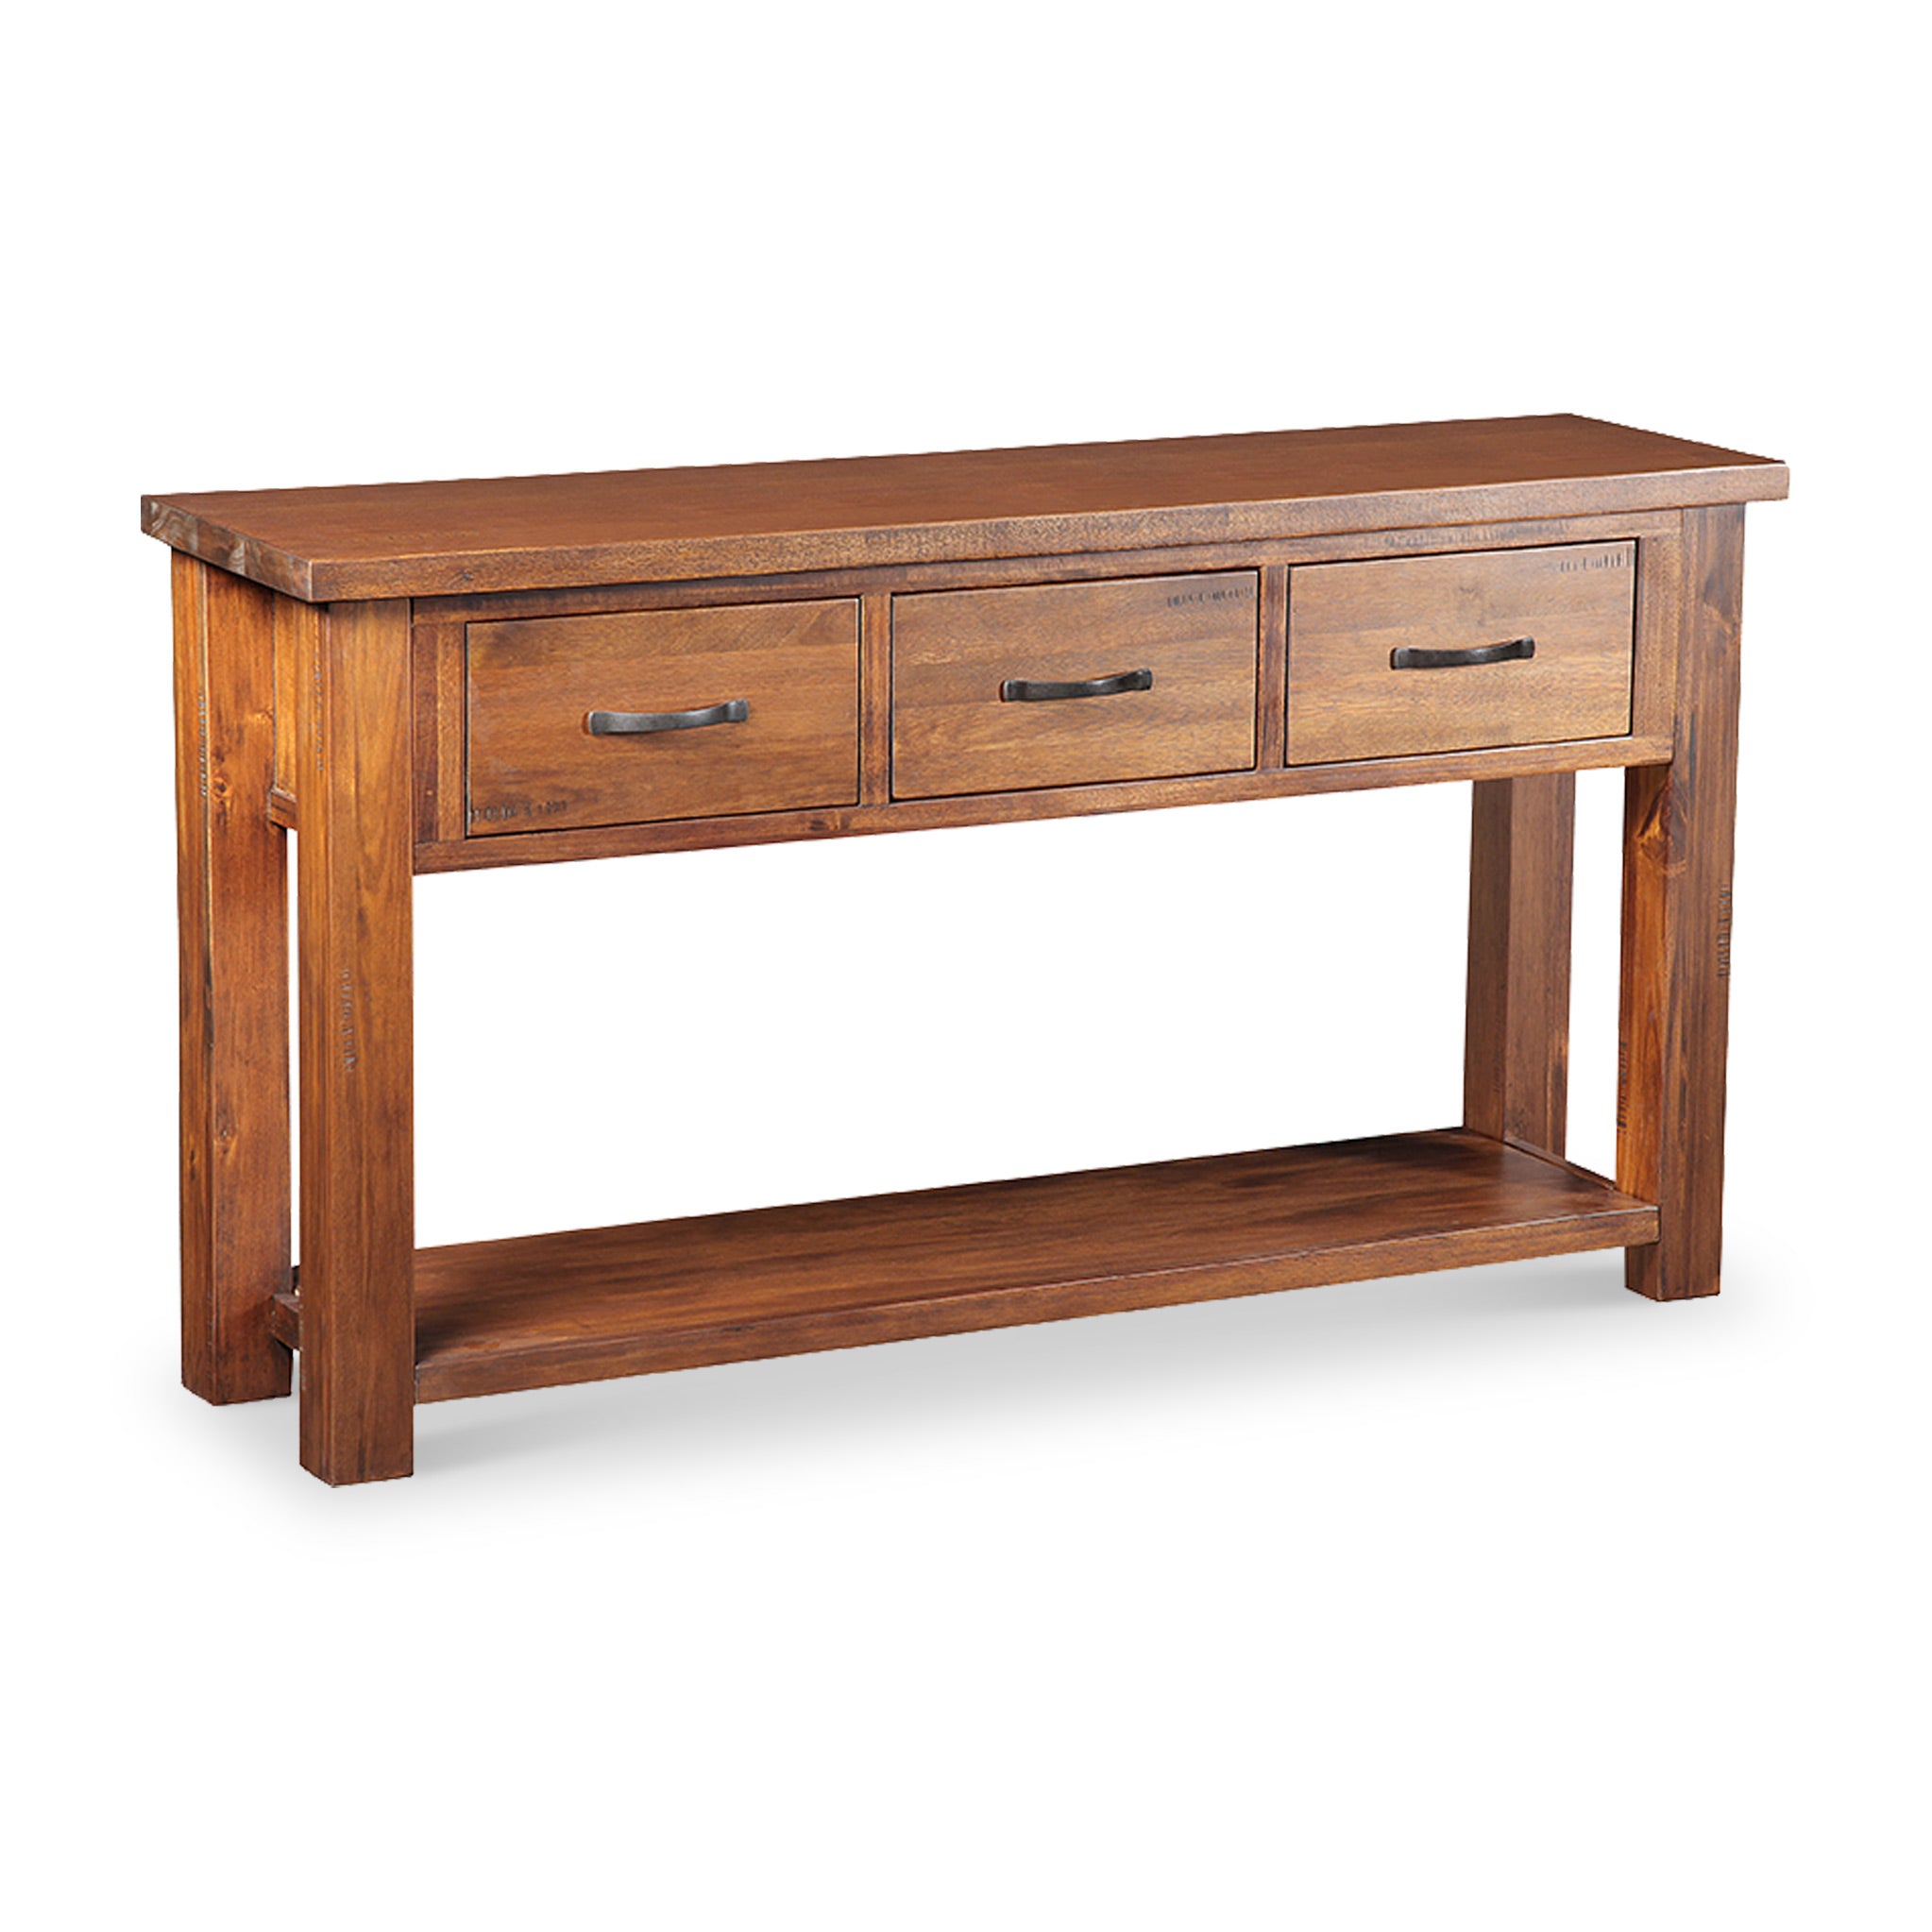 Ladock Acacia Console Table With 3 Drawers For Hallway Roseland